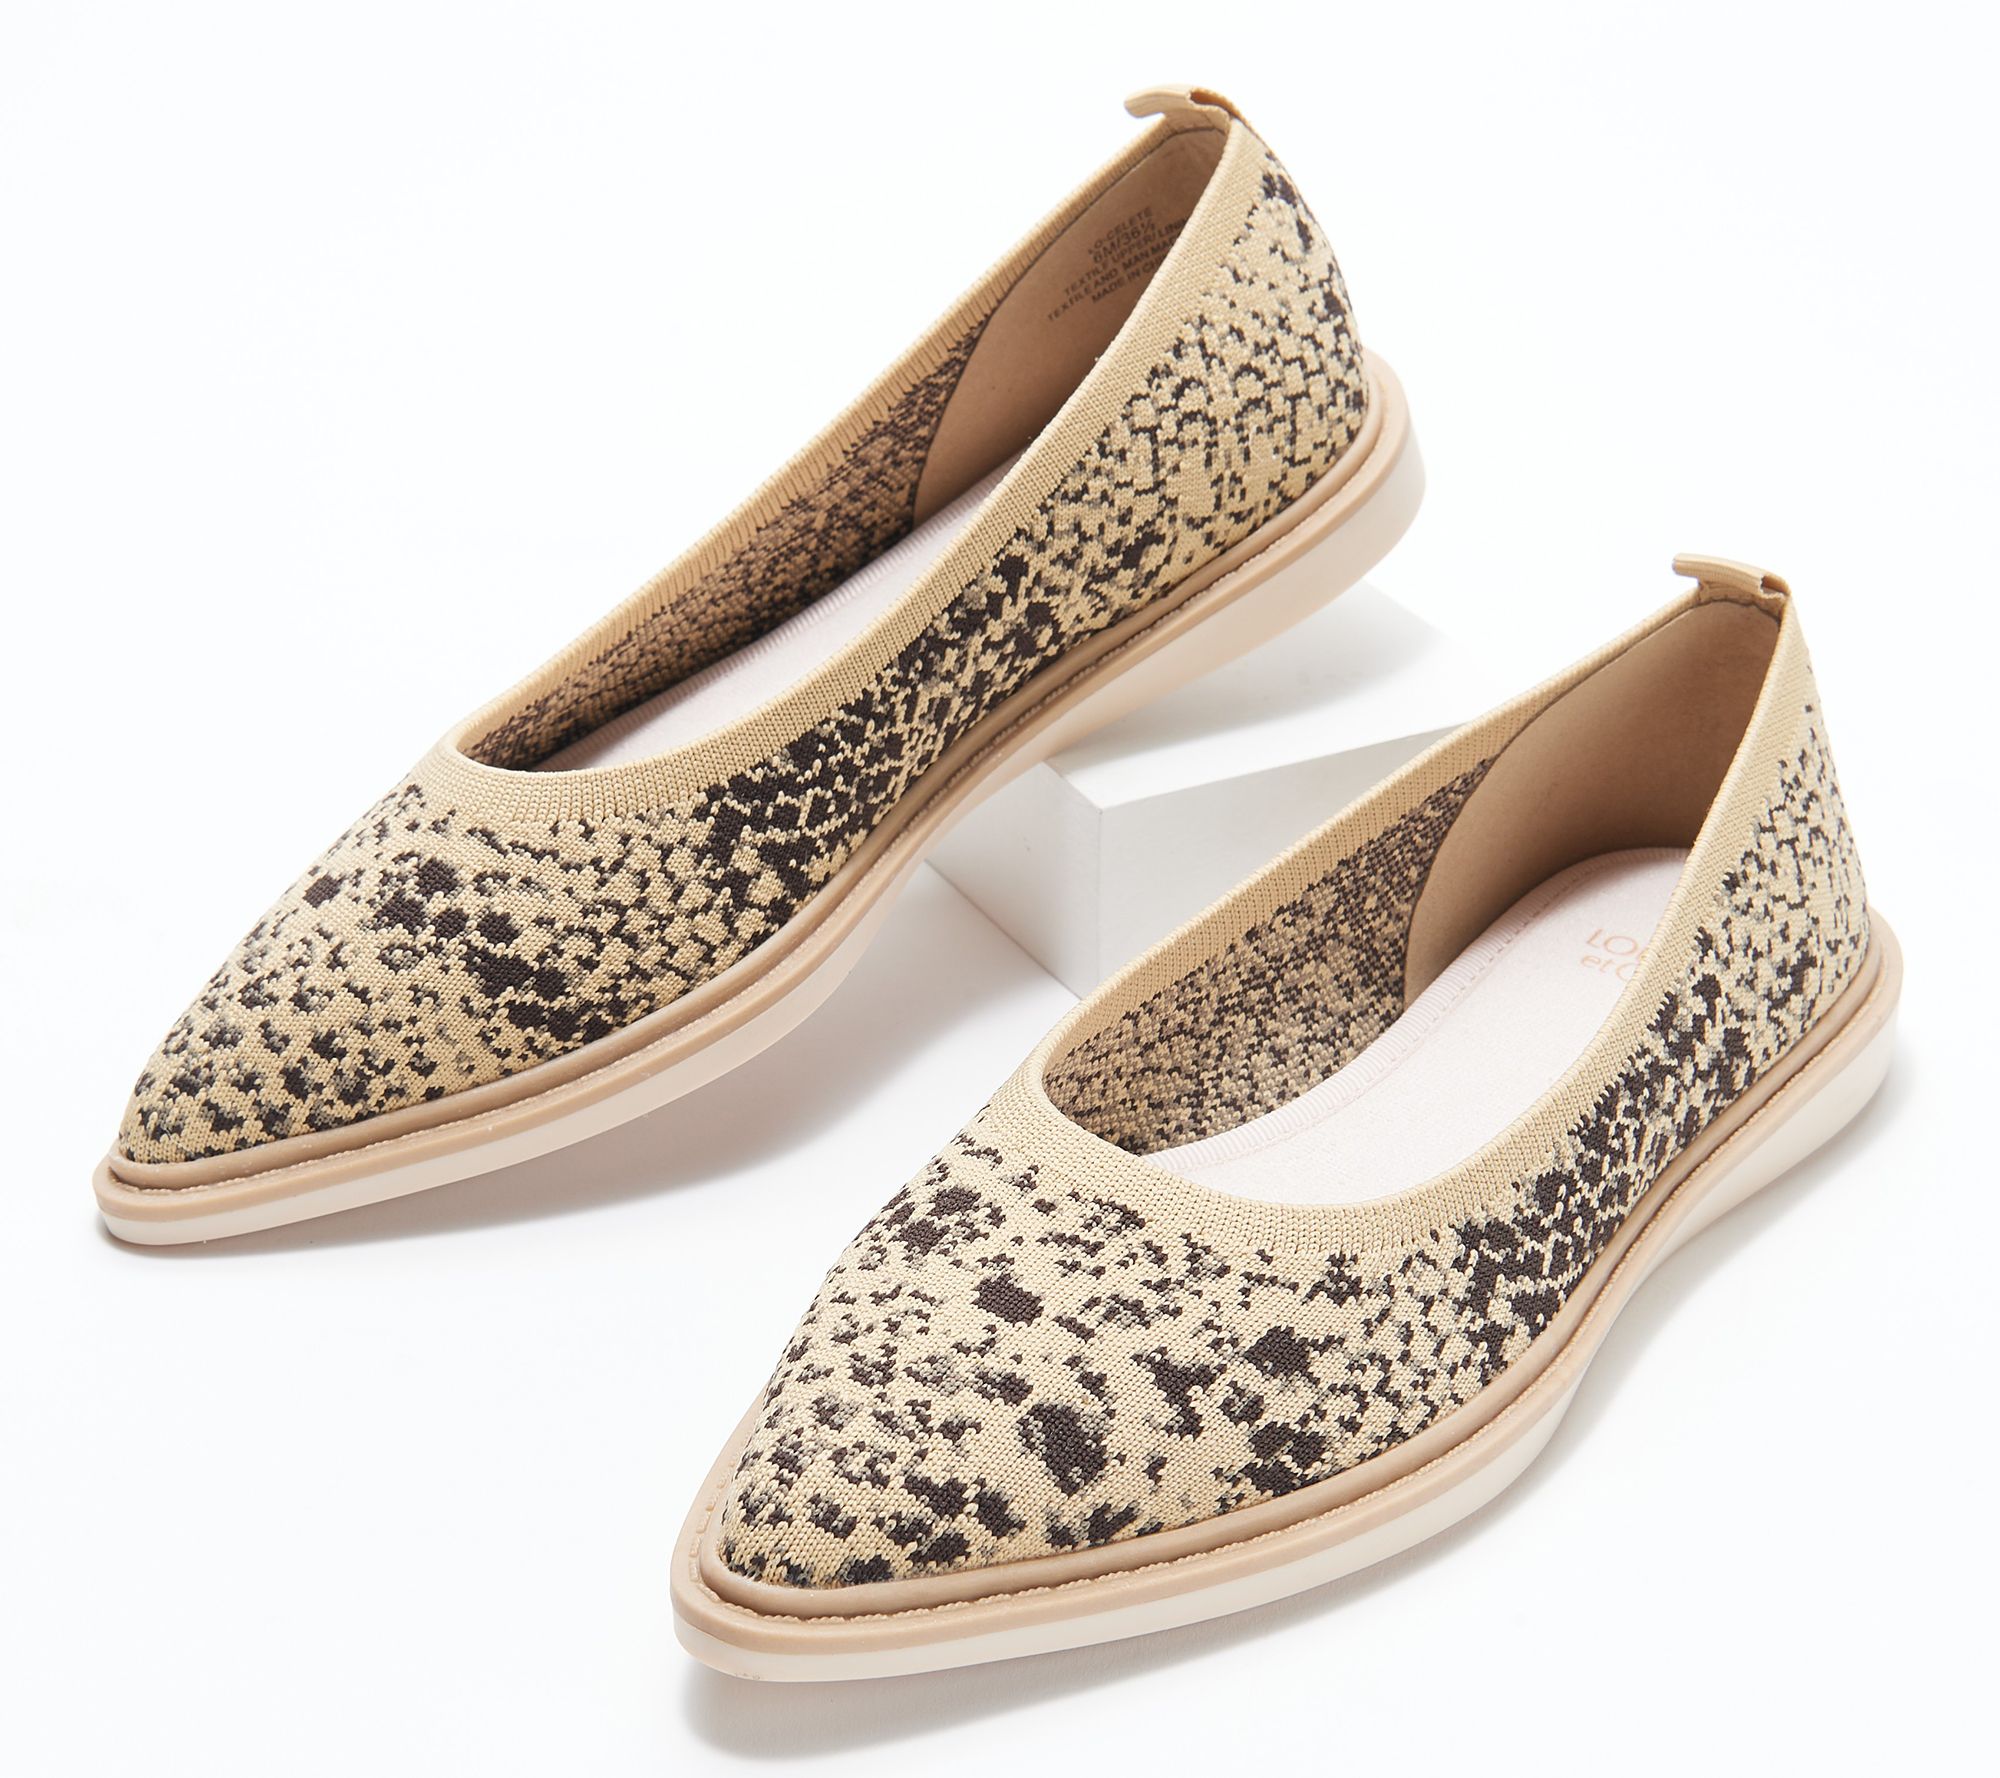  LOUISE ET CIE Women's Arely | Flats